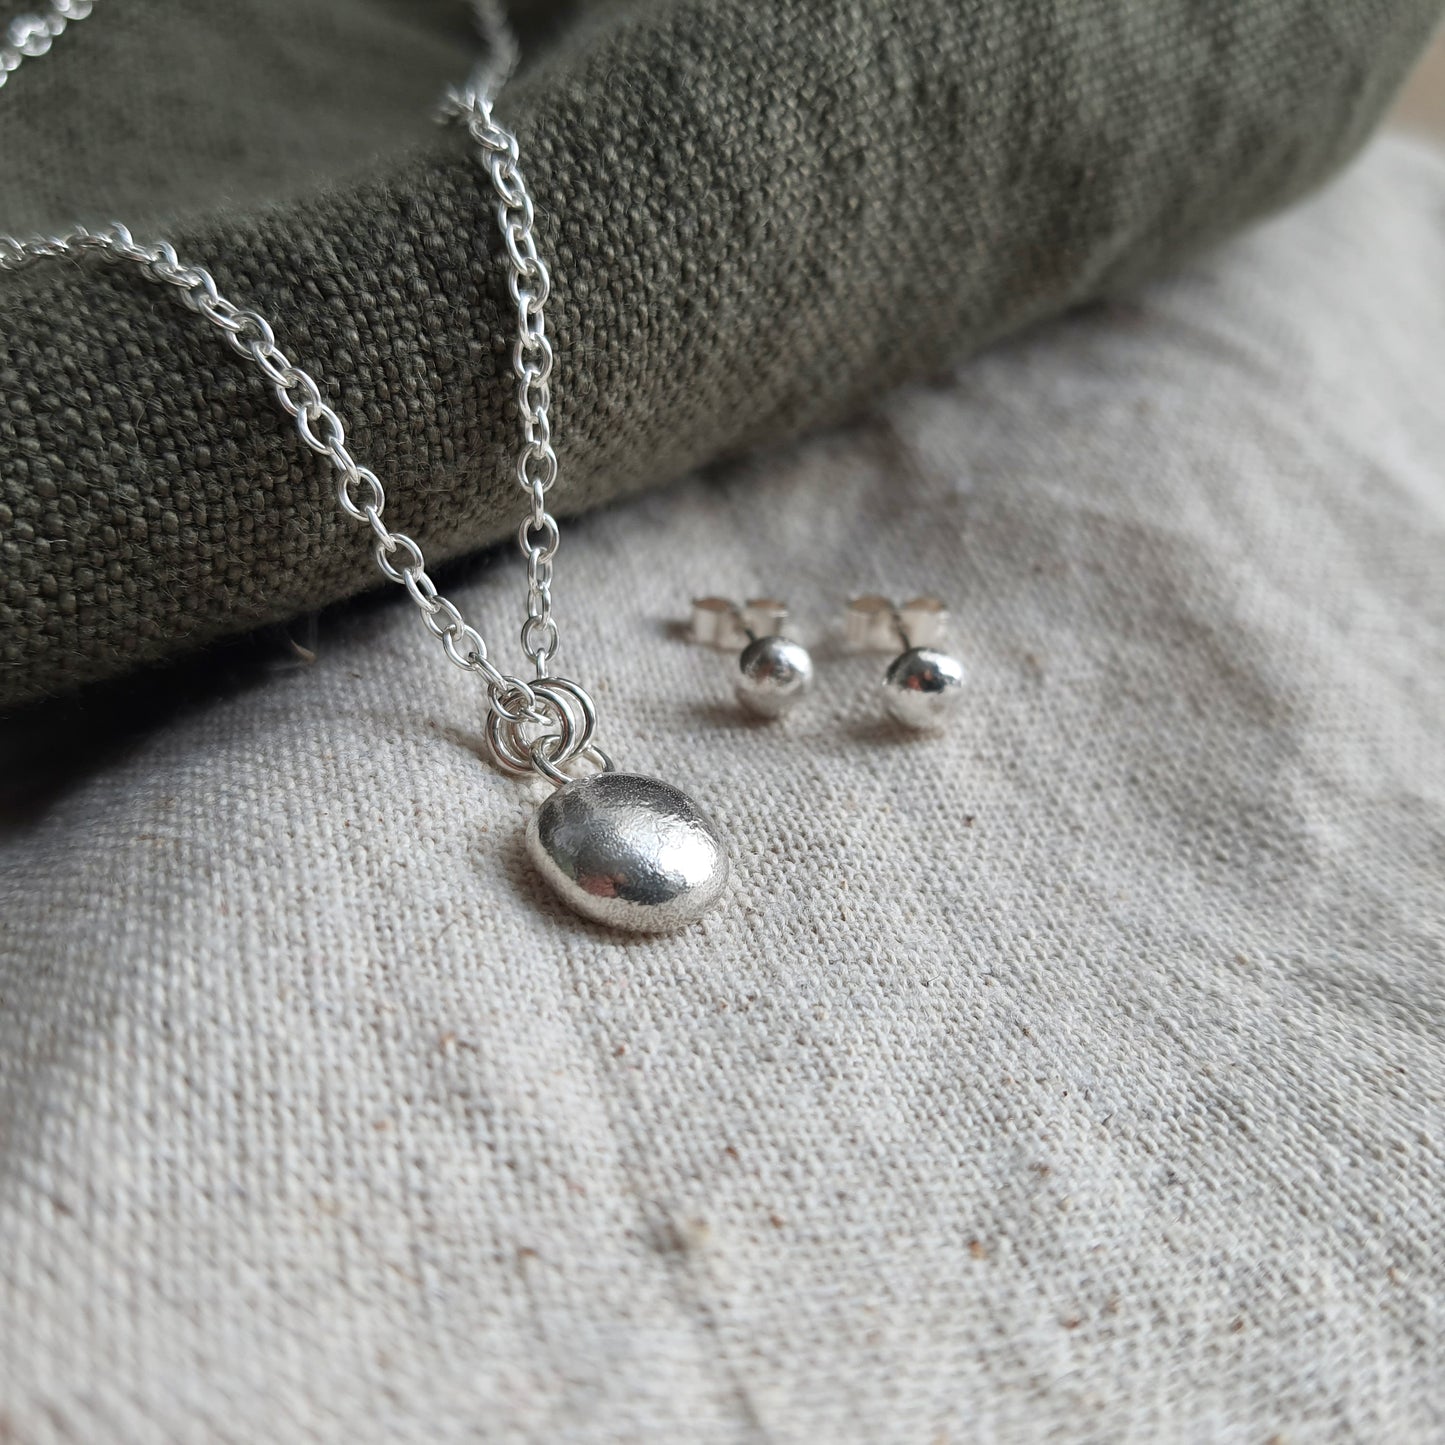 Pebble Necklace and Earrings Set